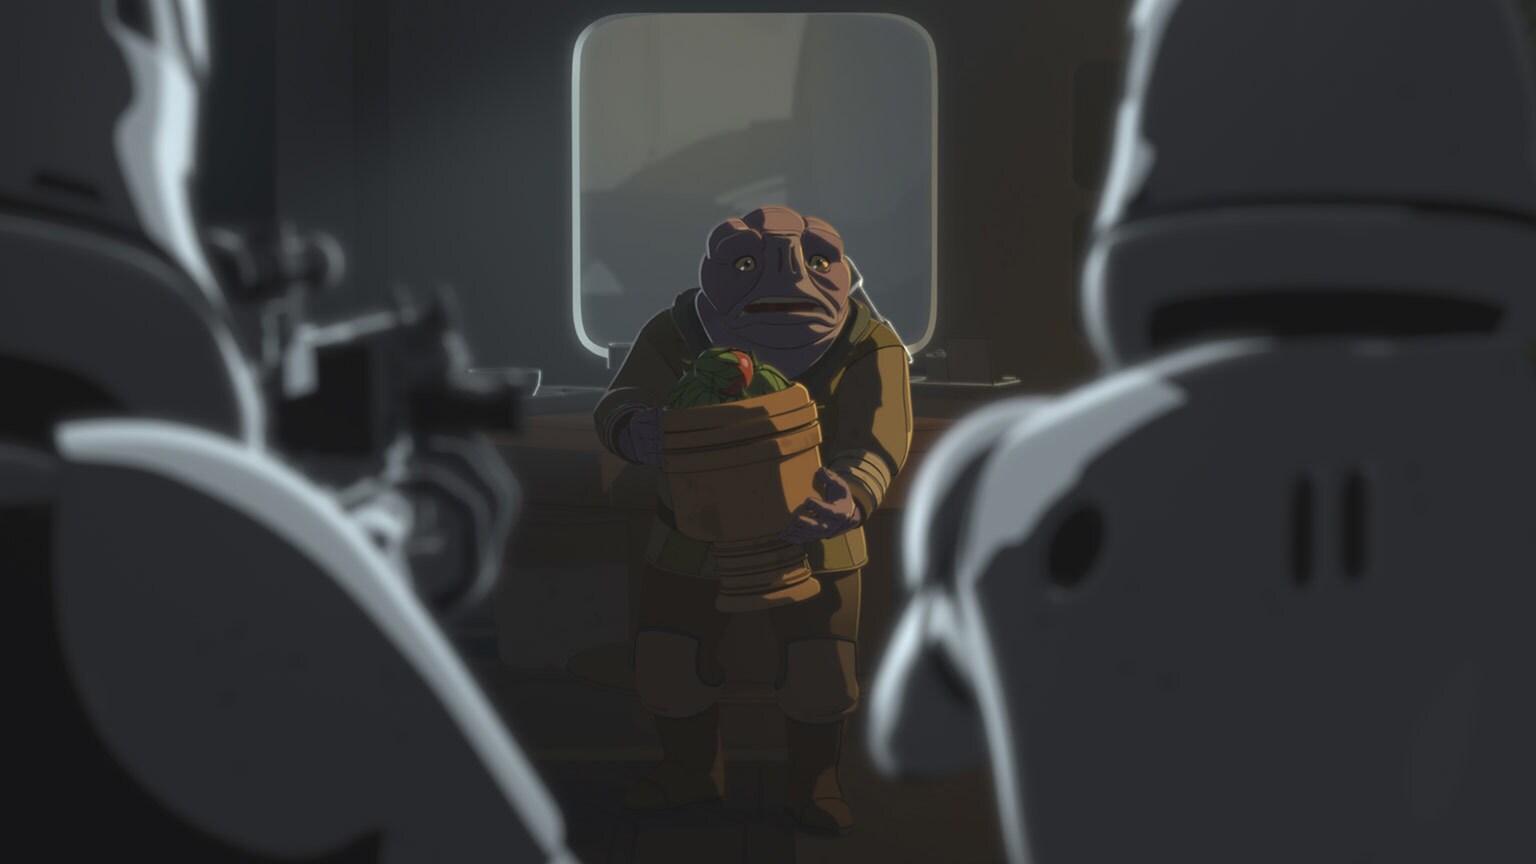 Bucket's List Extra: 4 Fun Facts from "Breakout" - Star Wars Resistance